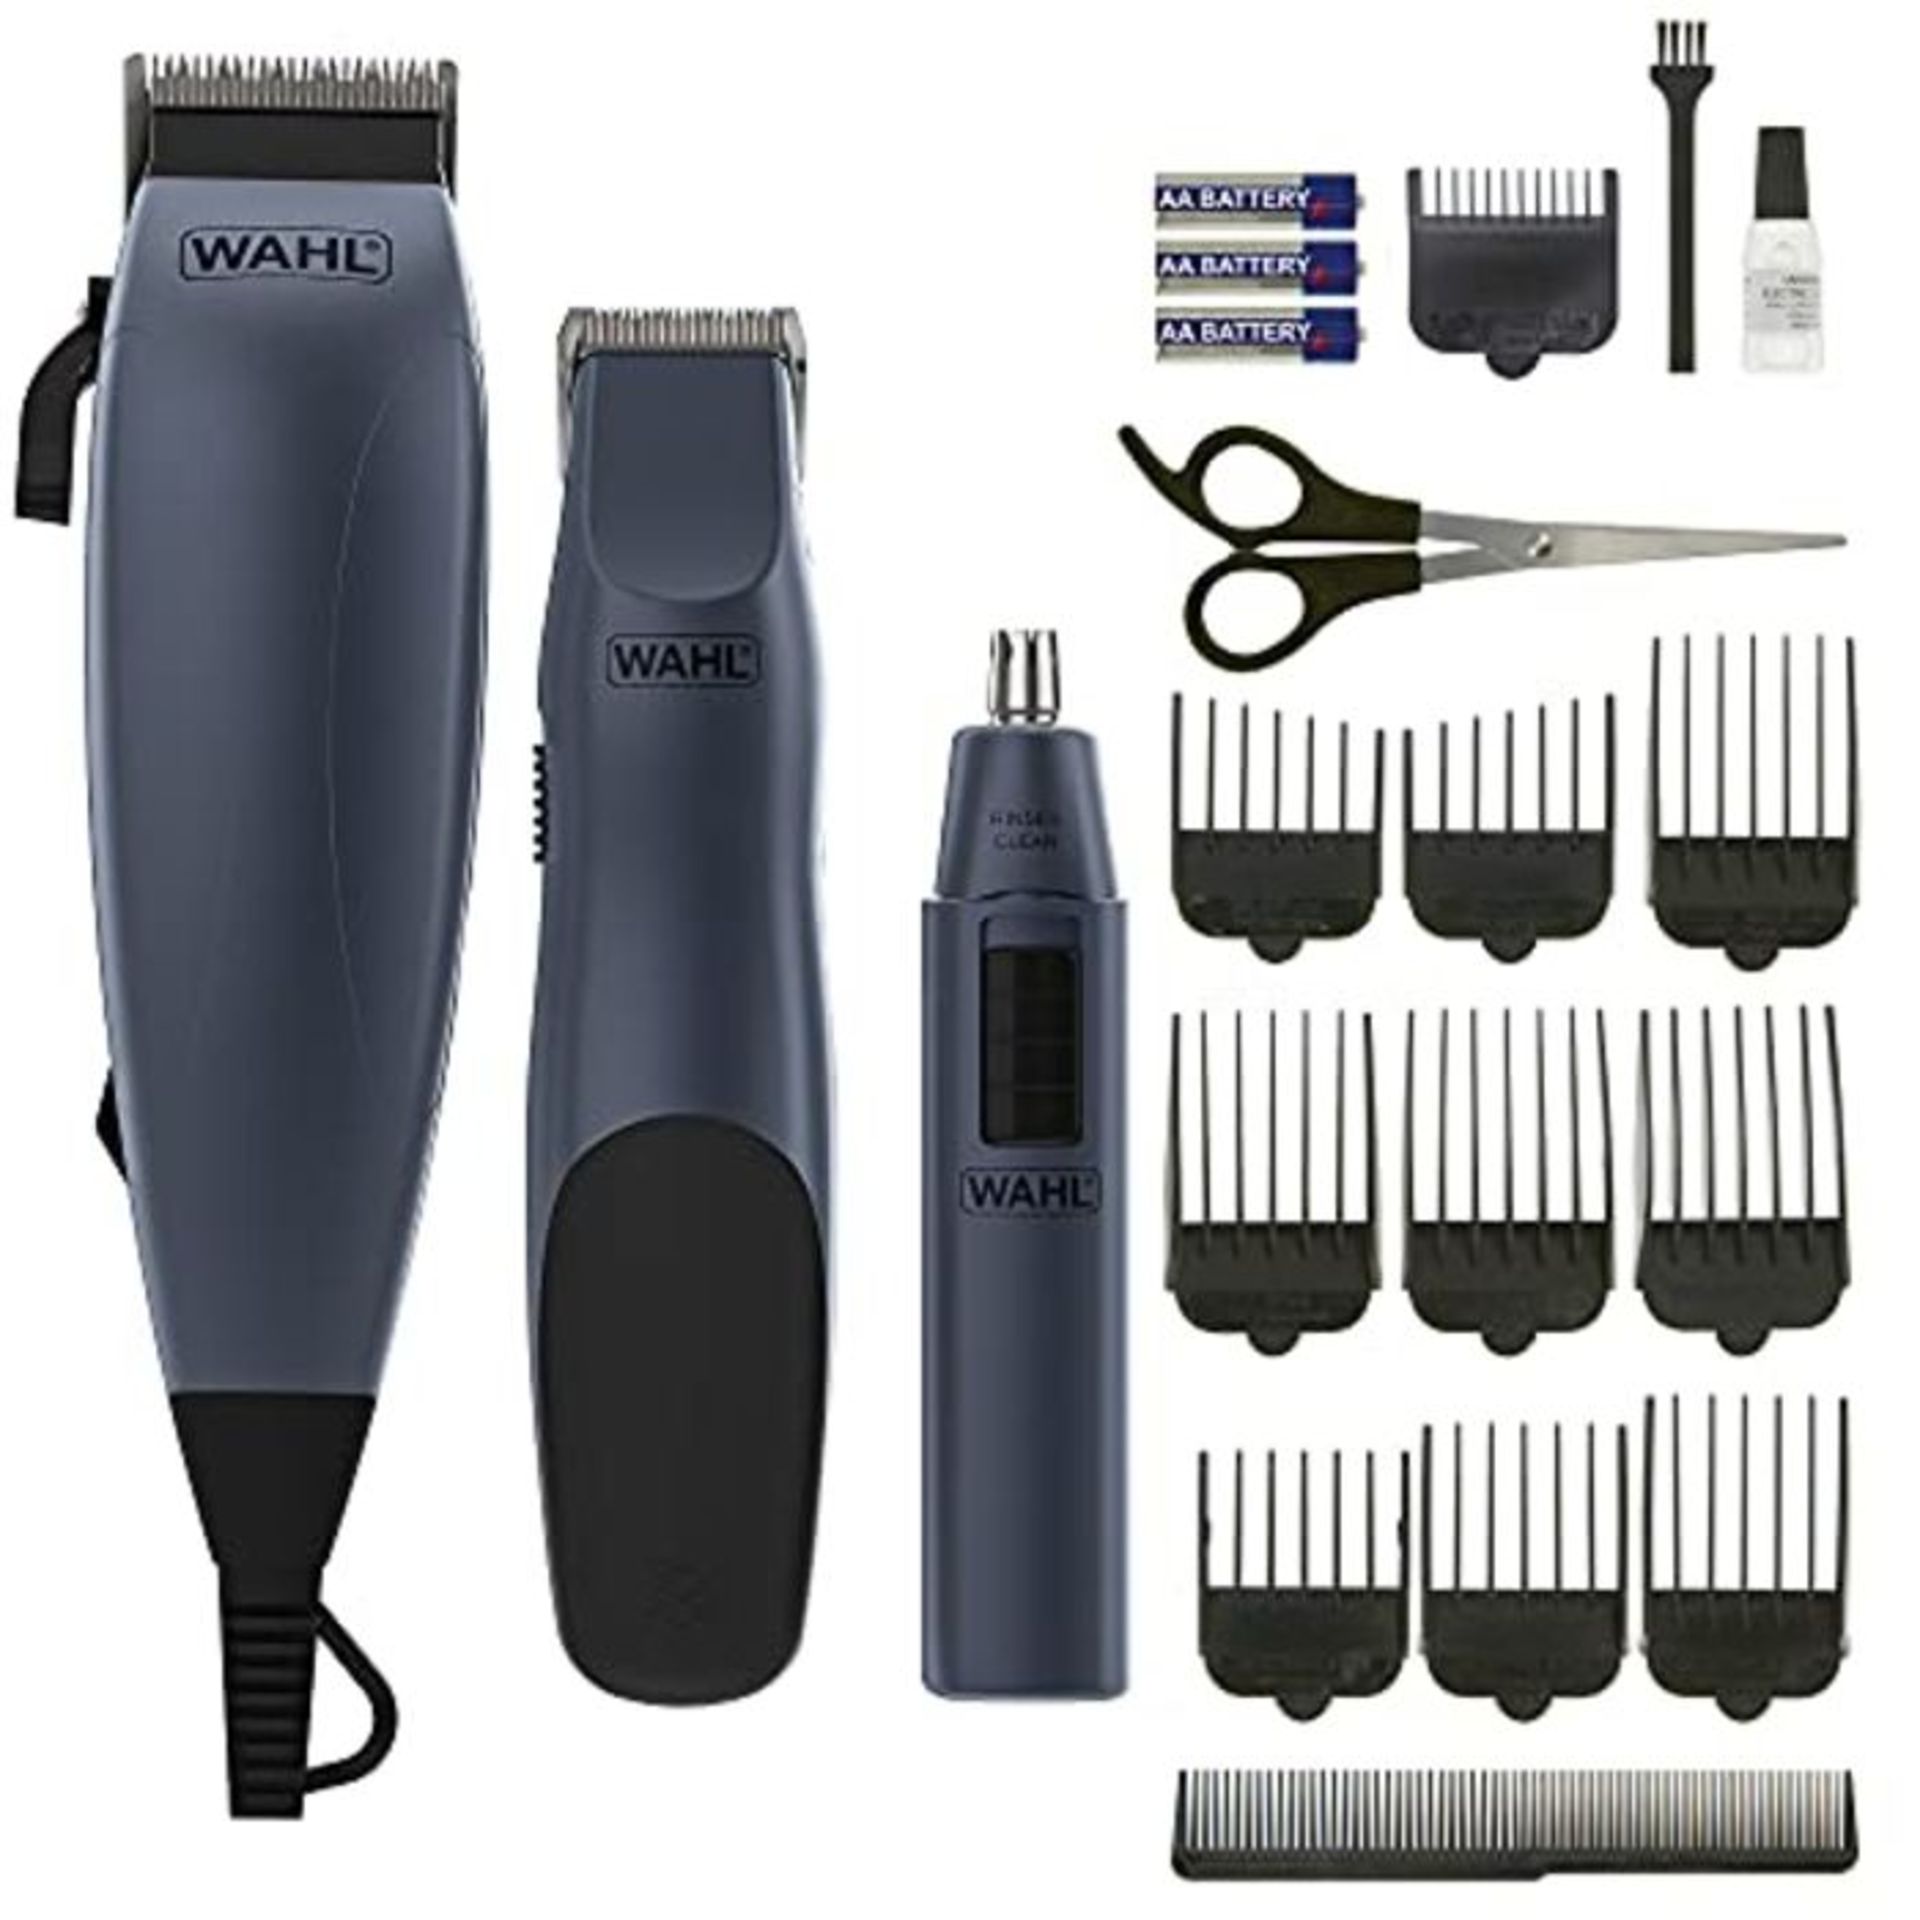 Wahl Hair Clippers for Men, 3-in-1 Corded Head Shaver Men's Hair Clippers in Storage C